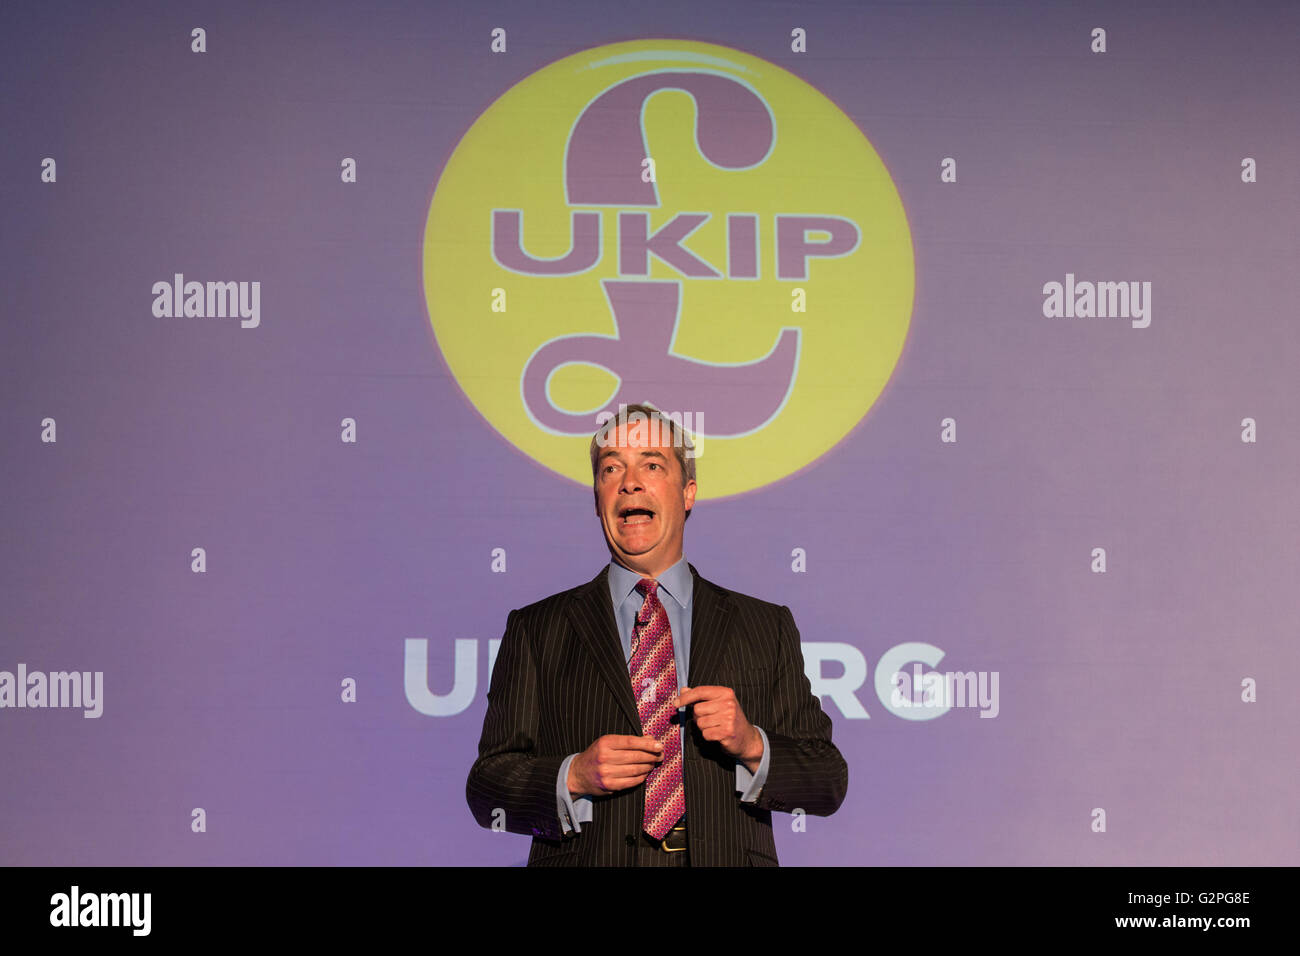 Leeds, West Yorkshire. 1 June 2016. Leader of the UKIP Party and MEP Nigel Farage, speaks at a public meeting, as part of the Brexit Bus Tour campaign, at Leeds United FC, Elland Road, Leeds, West Yorkshire, on 1 June 2016. Credit:  Harry Whitehead/Alamy Live News Stock Photo